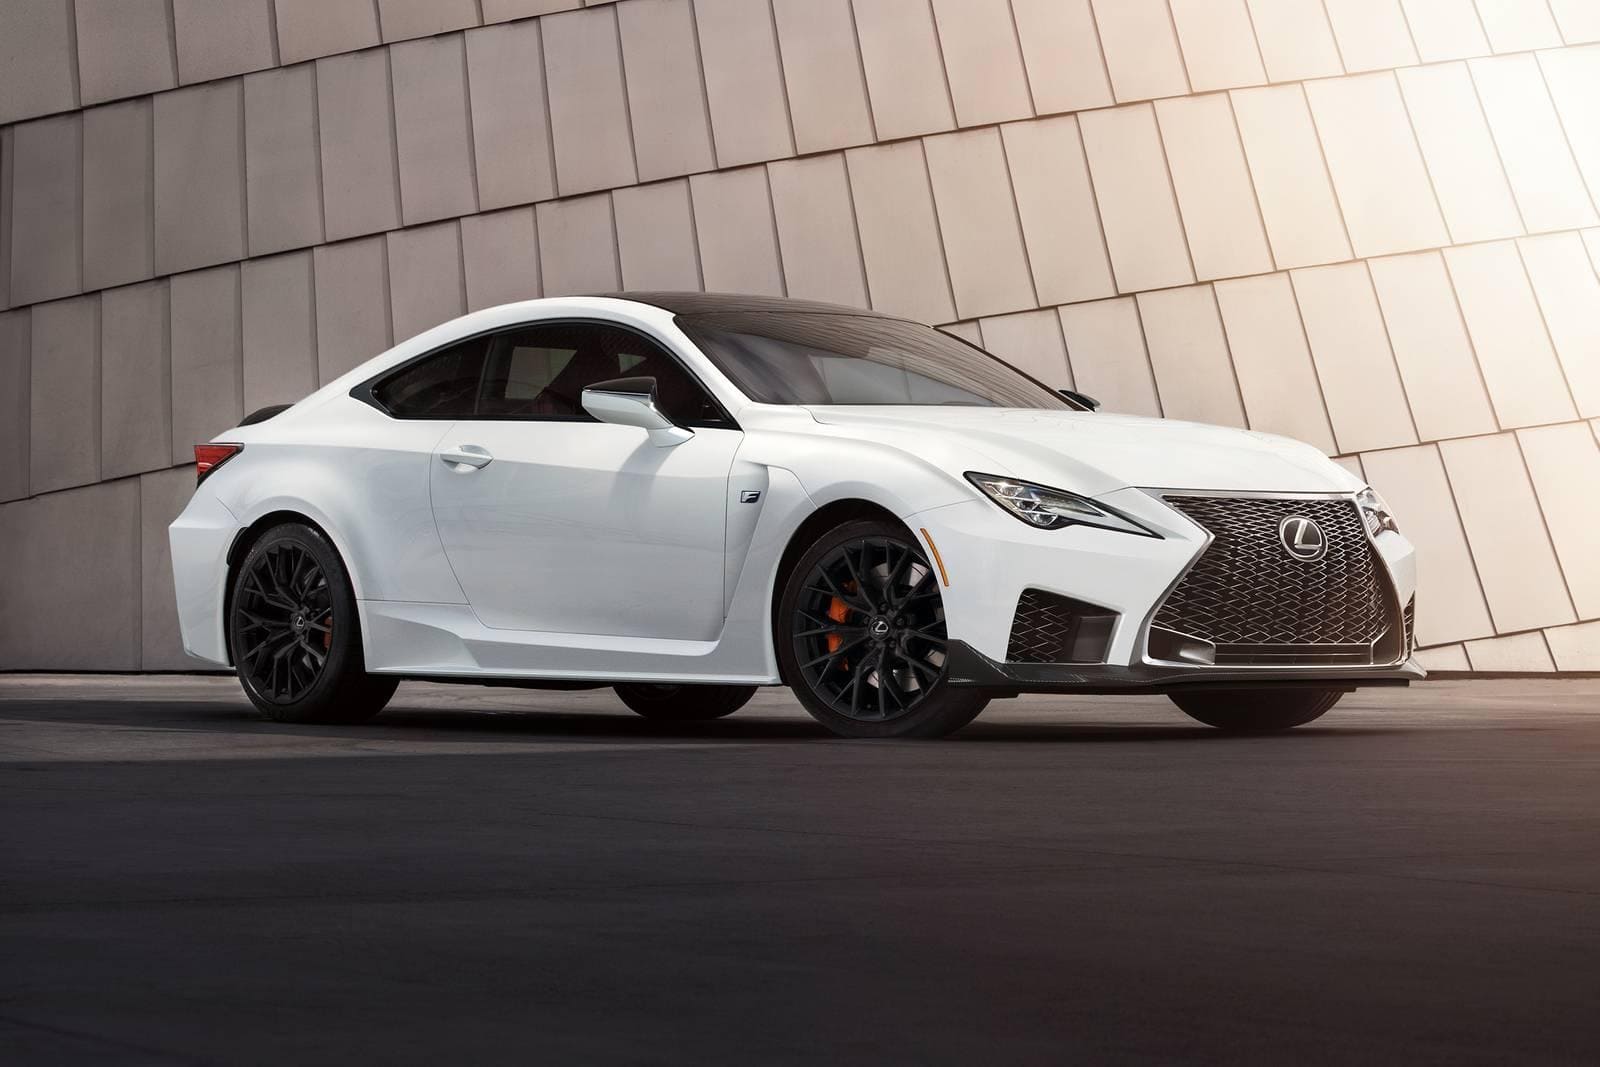 Lexus RC (Racing Coupe) - Dòng xe thể thao coupe